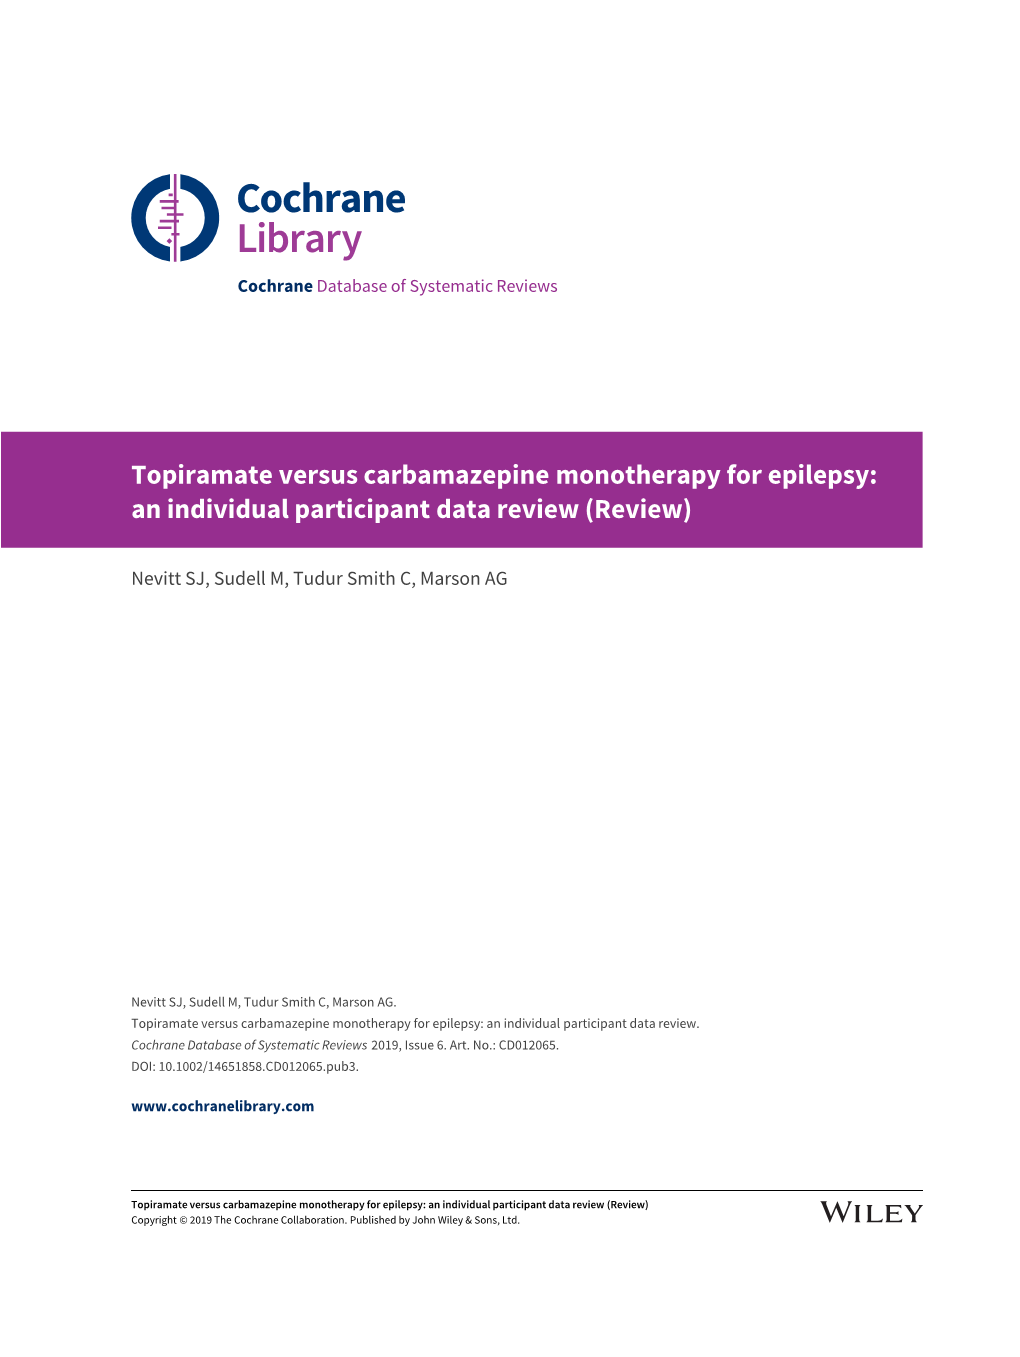 Topiramate Versus Carbamazepine Monotherapy for Epilepsy: an Individual Participant Data Review (Review)